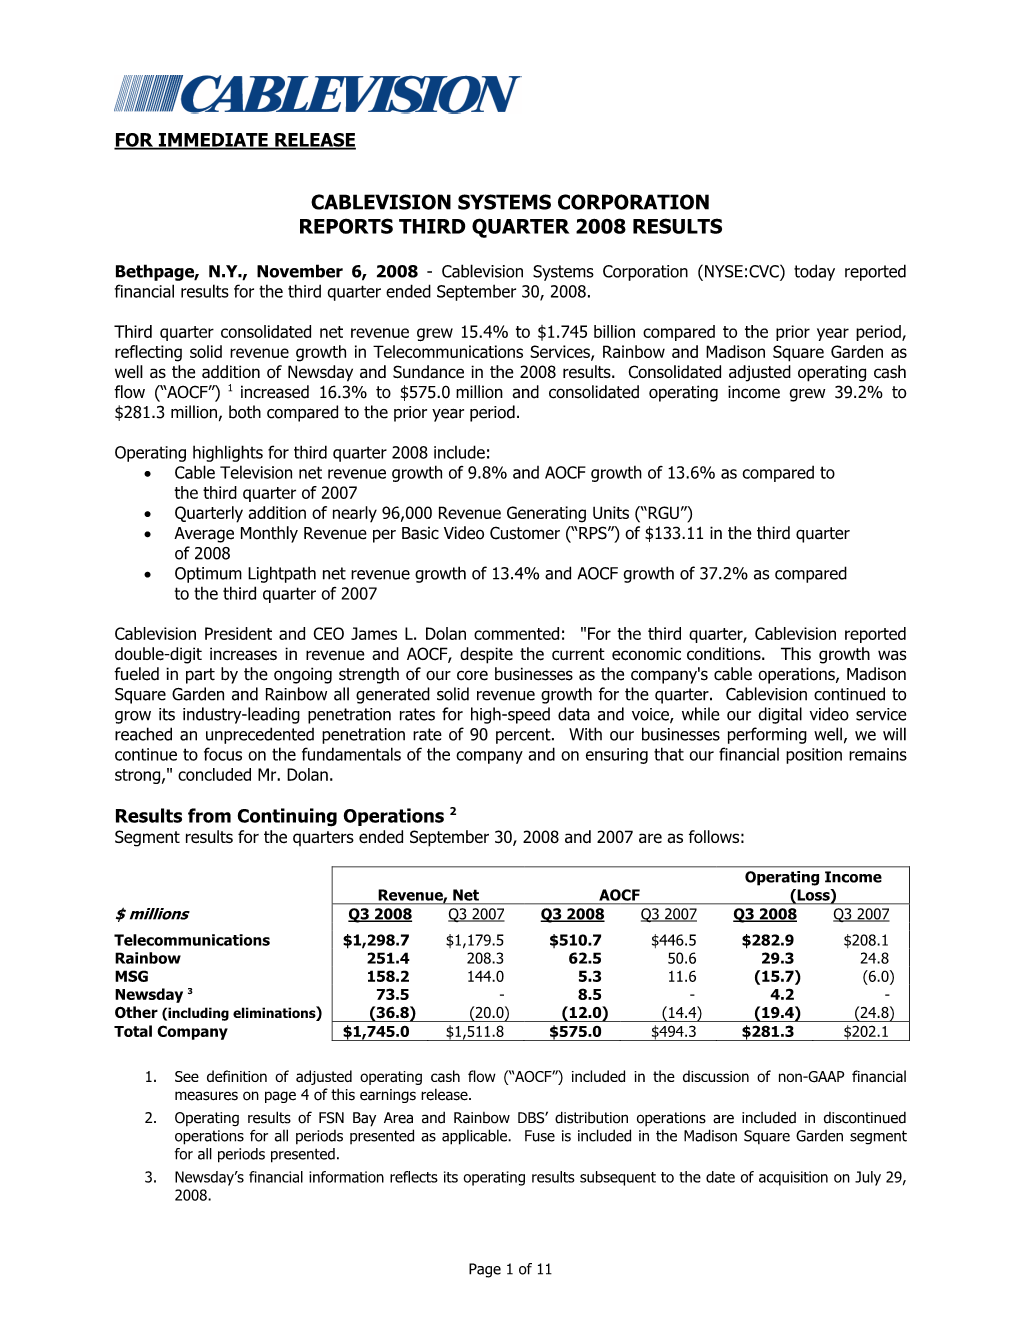 Cablevision Systems Corporation Reports Third Quarter 2008 Results